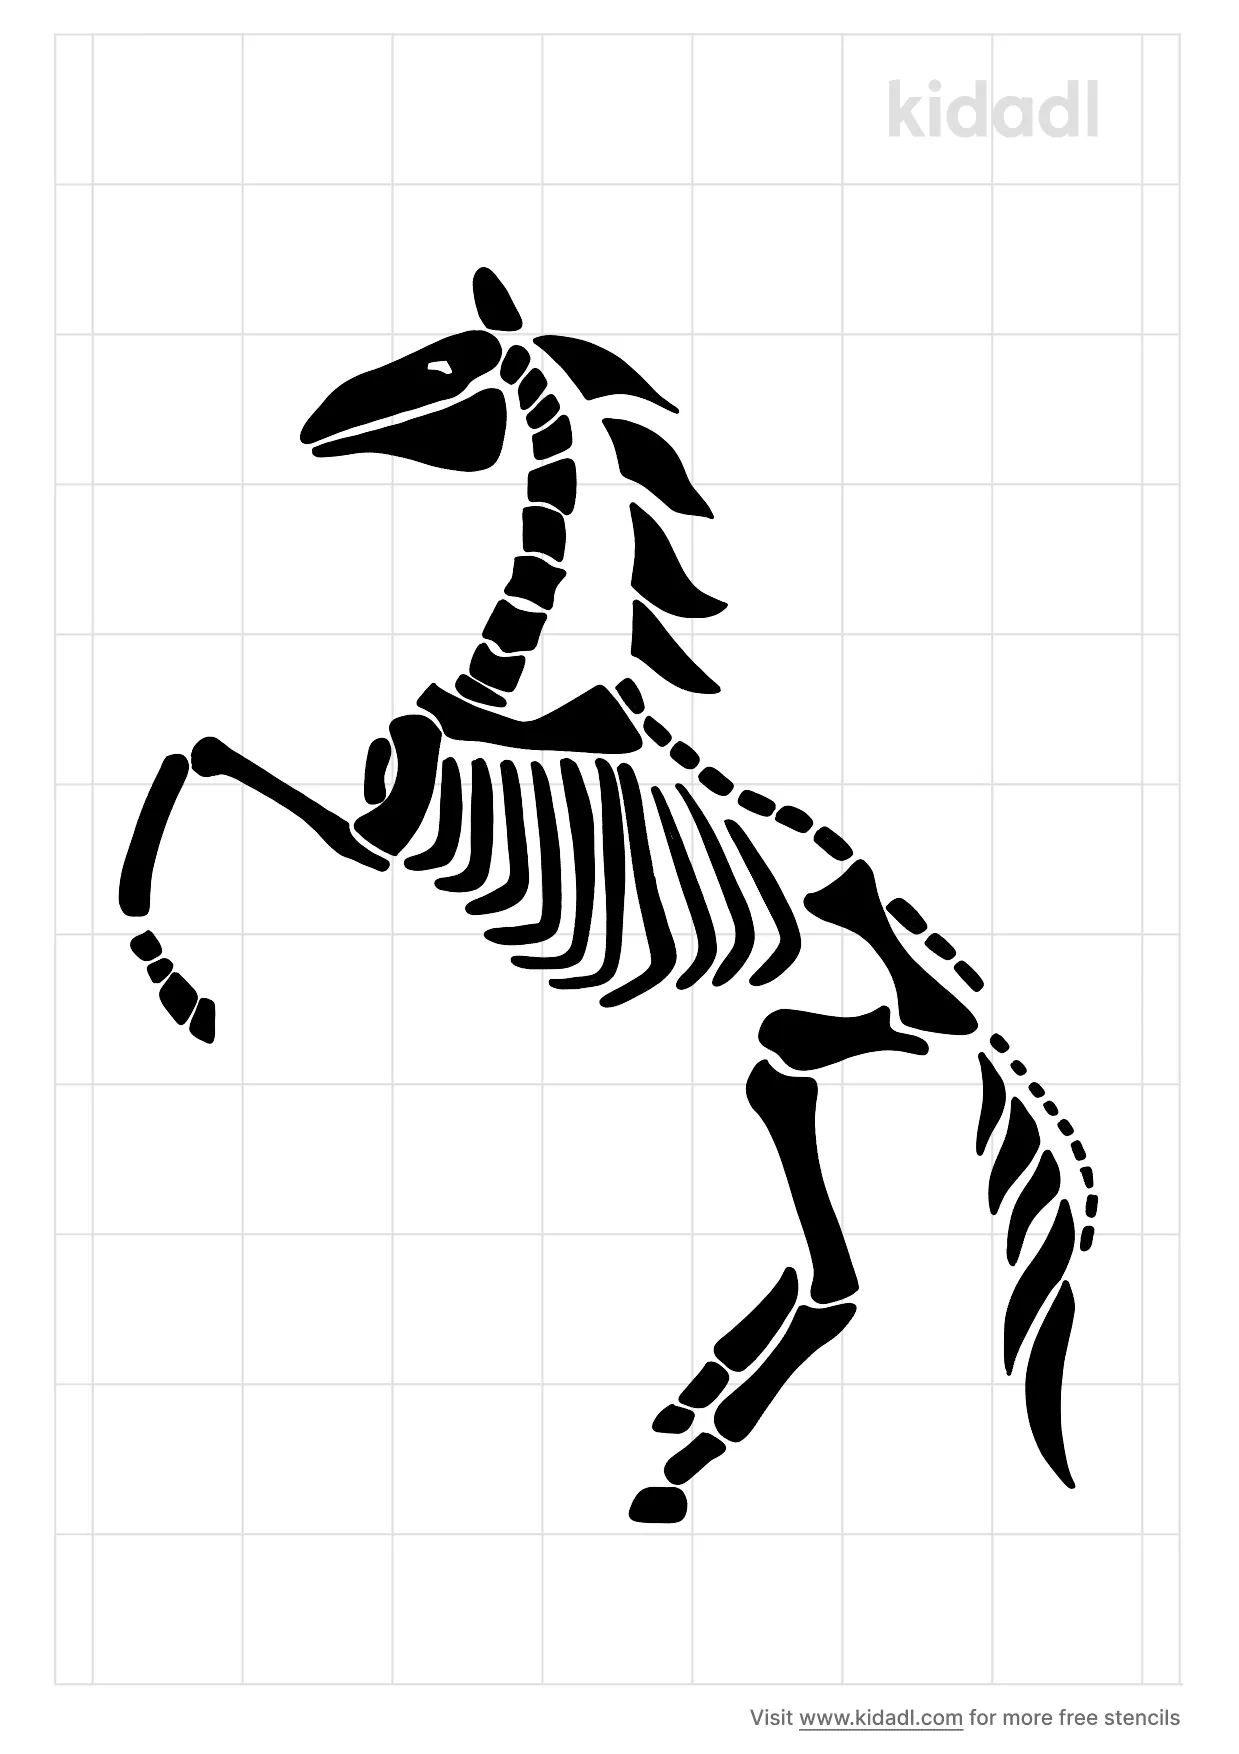 day of the dead horse stencils free printable halloween stencils kidadl and halloween stencils free printable stencils kidadl